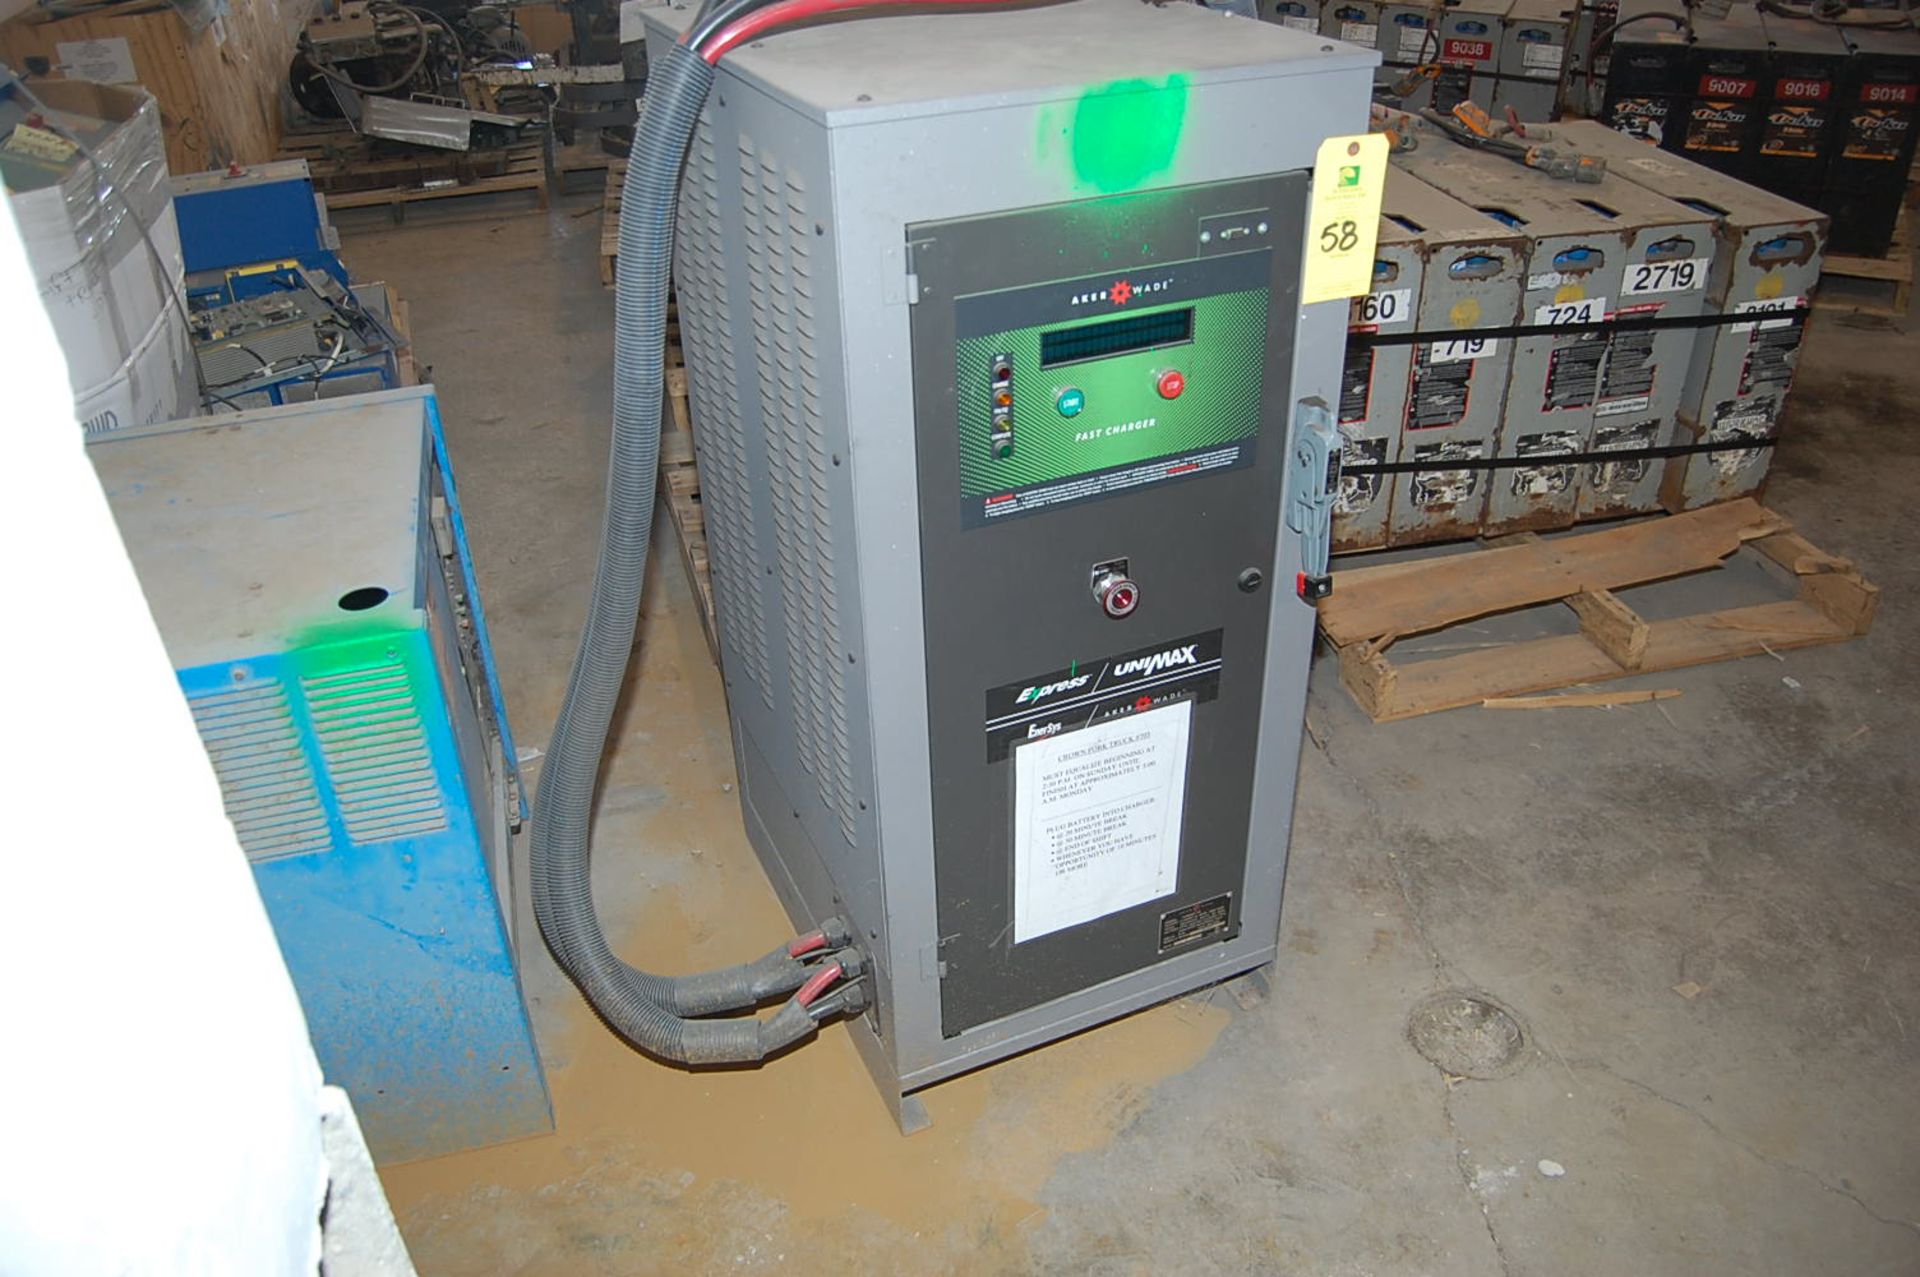 Enersys/Aker-Wade Fast Charger Electric Battery Charger, Model #Unimax 40, Output 12-80VDC/Cells 6- - Image 2 of 3